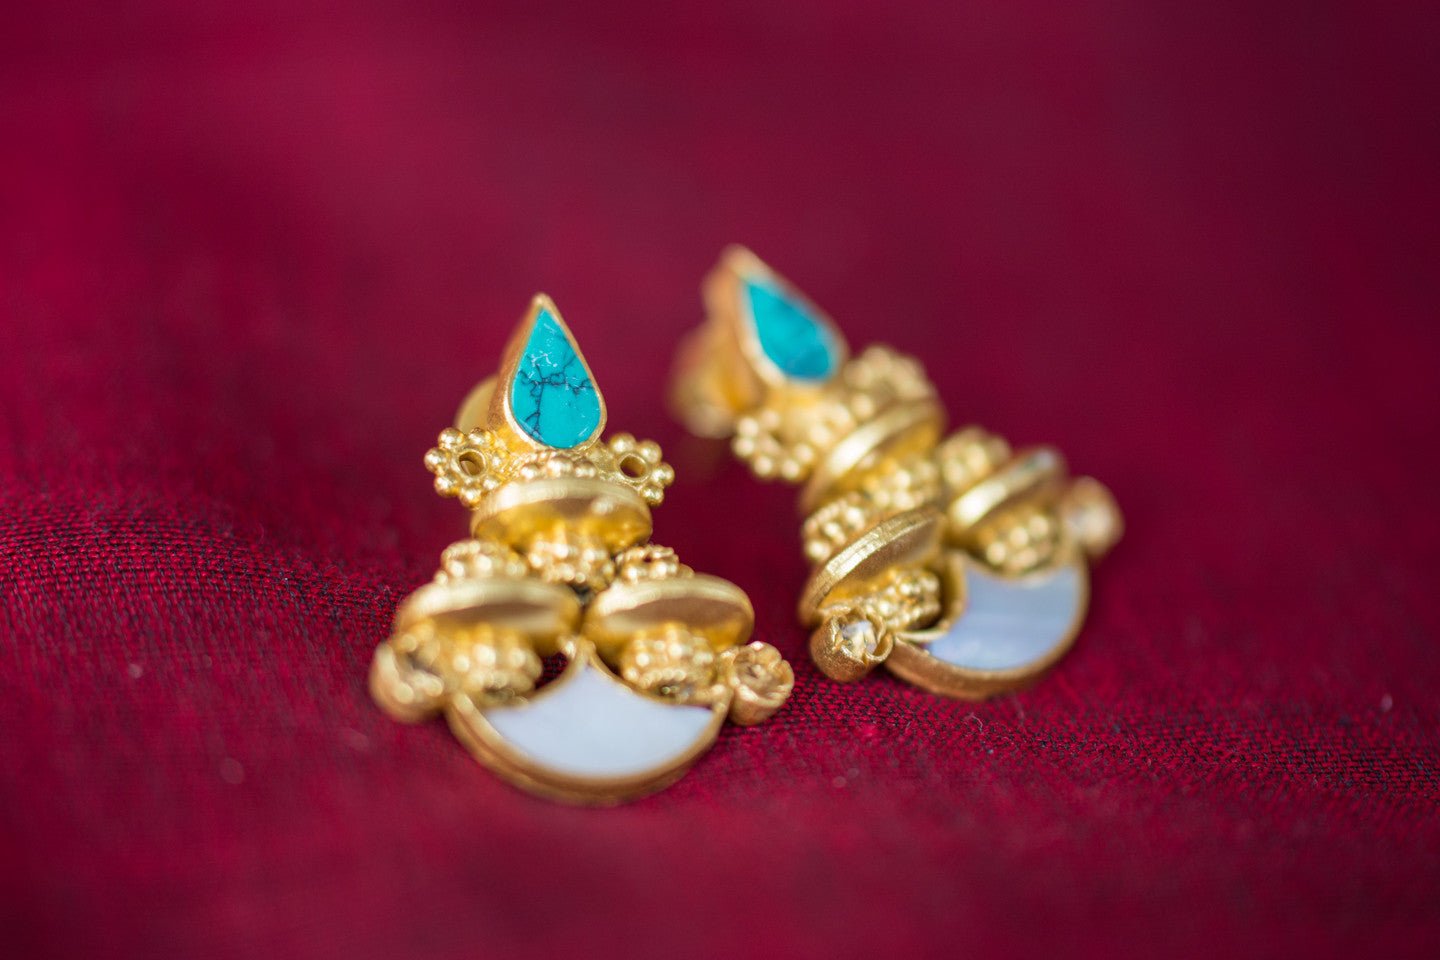 20a433-silver-gold-amrapali-earrings-turquoise-glass-alternate-view